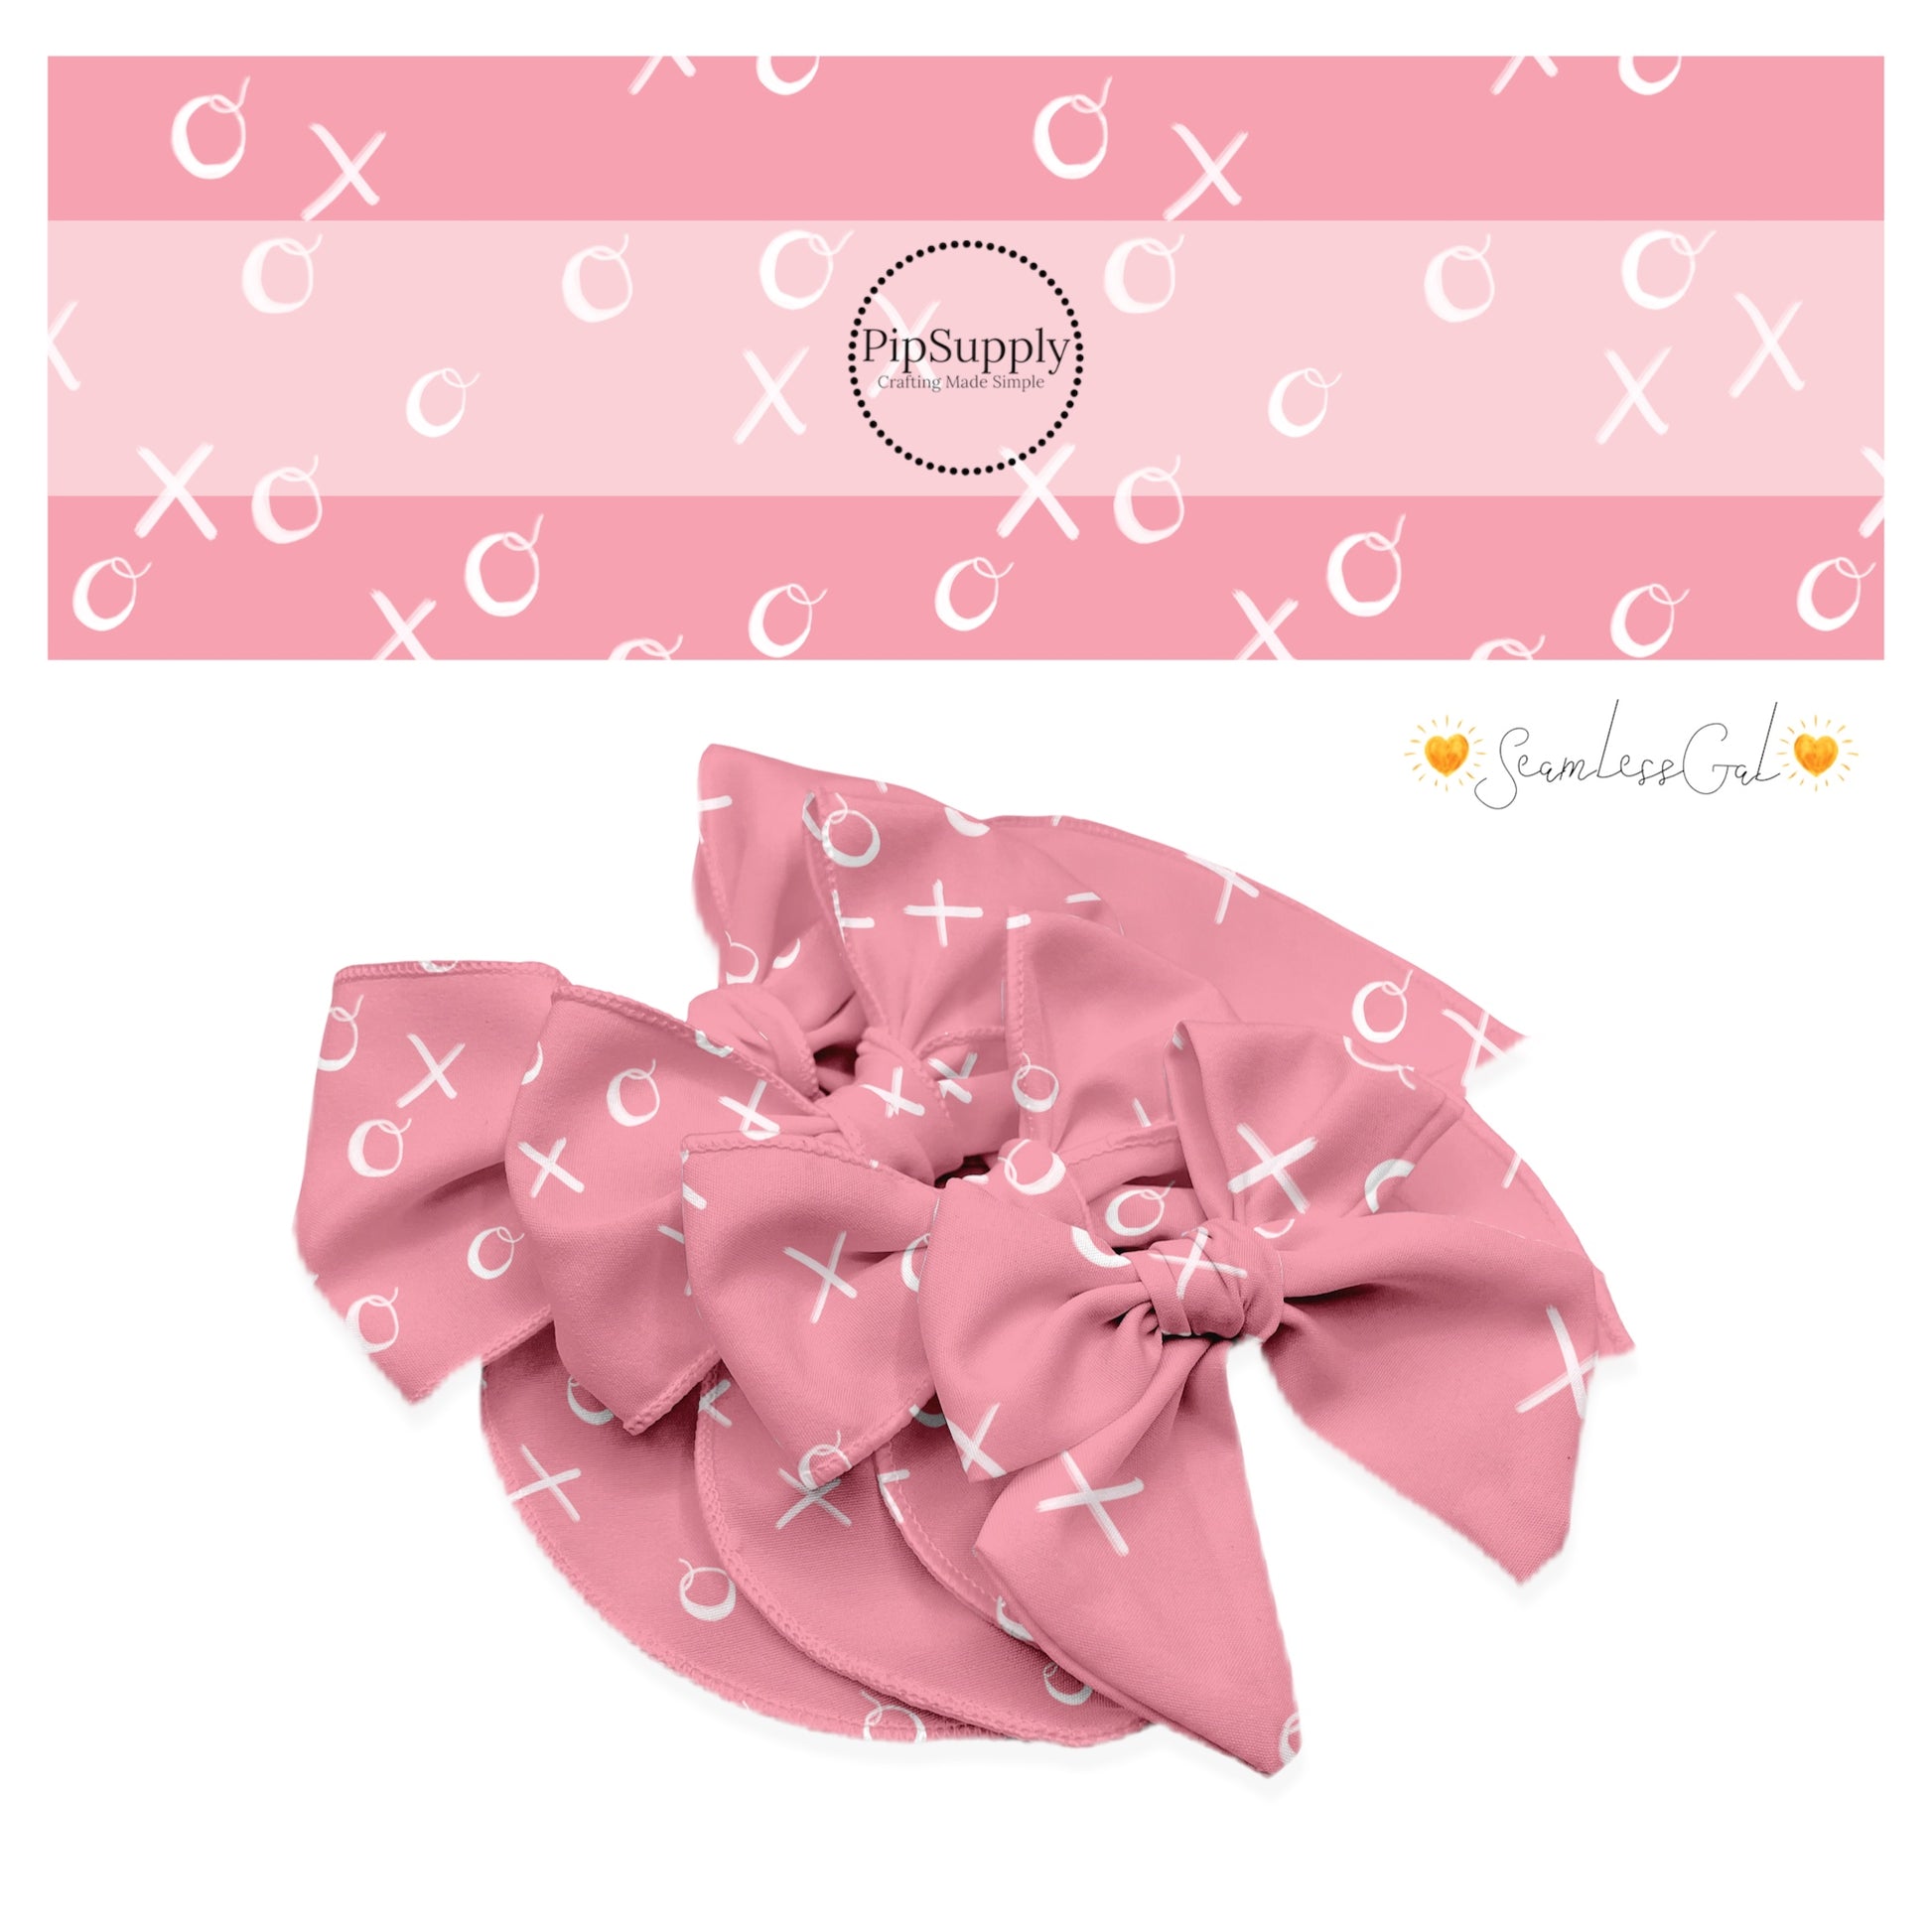 Scattered XOXO on pink bow strips